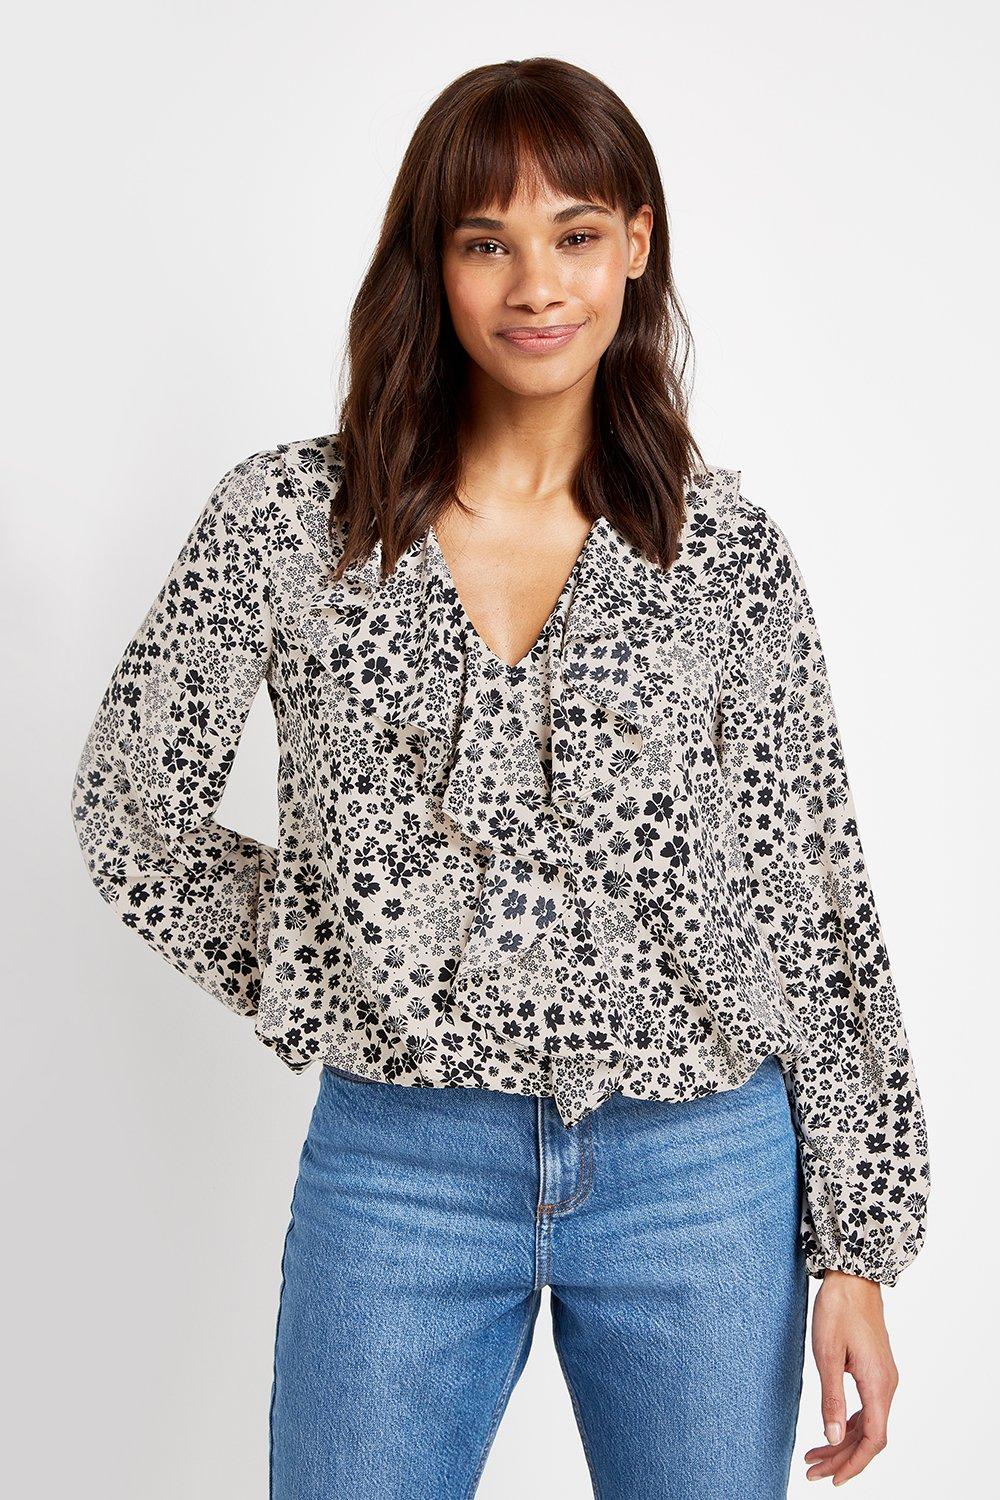 The Stylish, Versatile Top To Add To Your Collection. A Monochrome Colourway And Chic Floral Print Bring Timeless Style, Whilst Frill Detailing Gives This A Contemporary Twist. Wear With Black Skinny Jeans And Heeled Boots For A Stylish Evening Look.&Nbsp